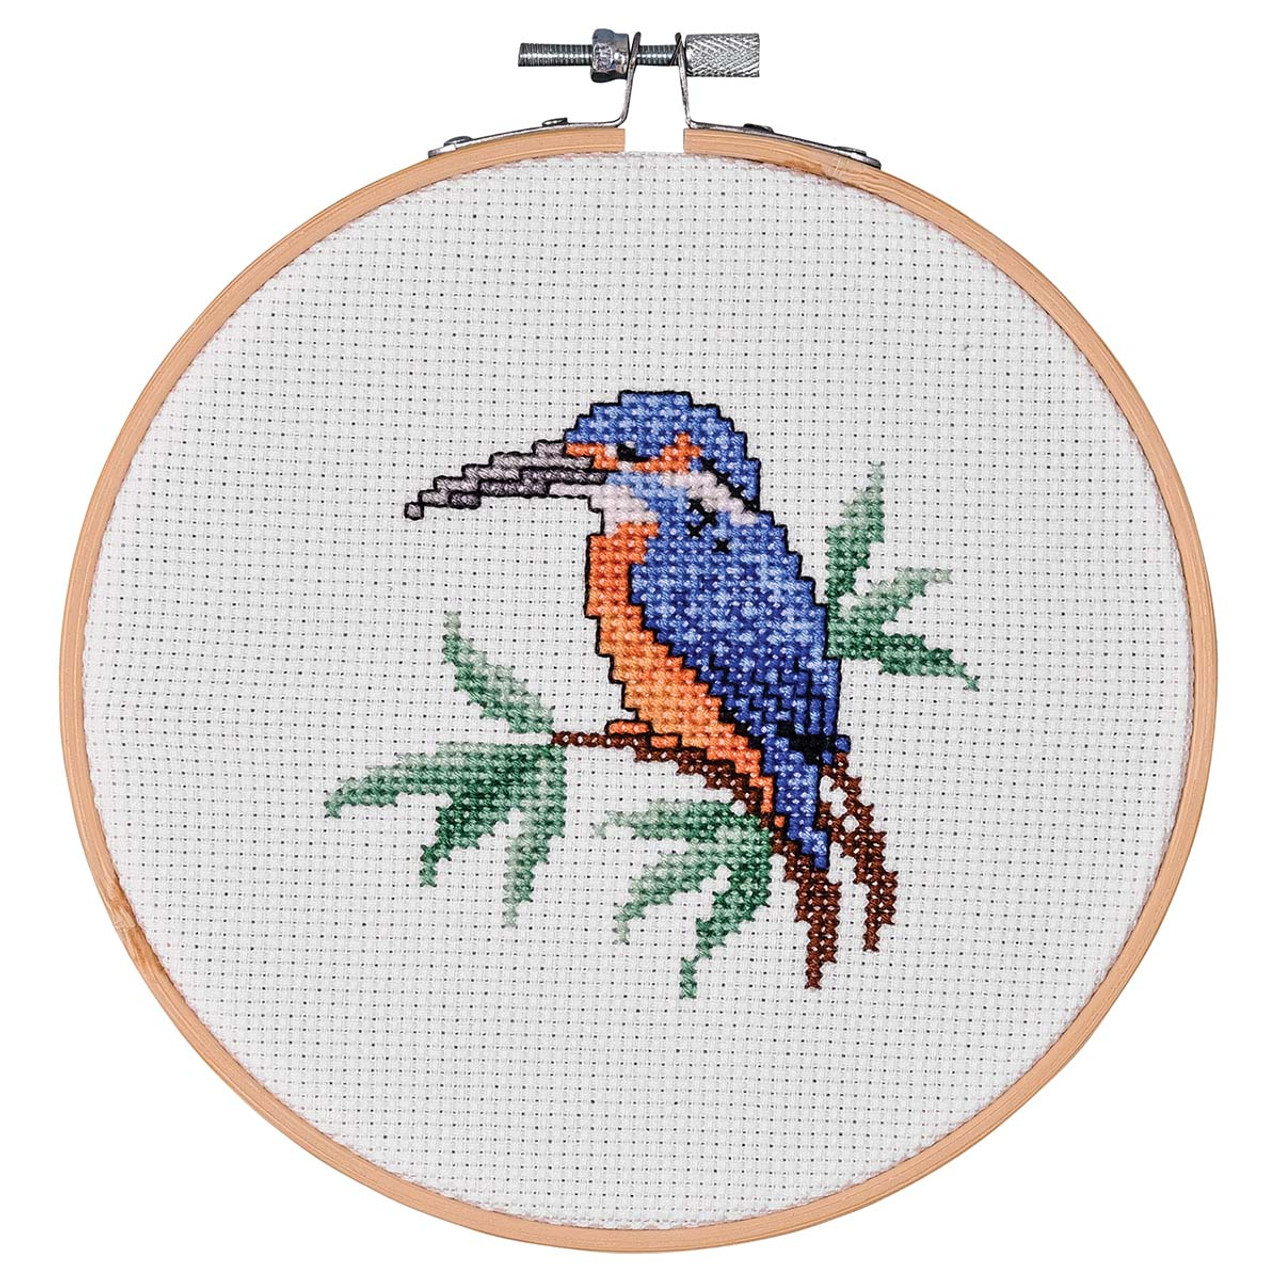 Birds Flowers Embroidery Kit for Adults Beginners Stamped Cross Stitch Kits with Birds Pattern Stamped Embroidery Cloth Hoops Threads Needles Easy